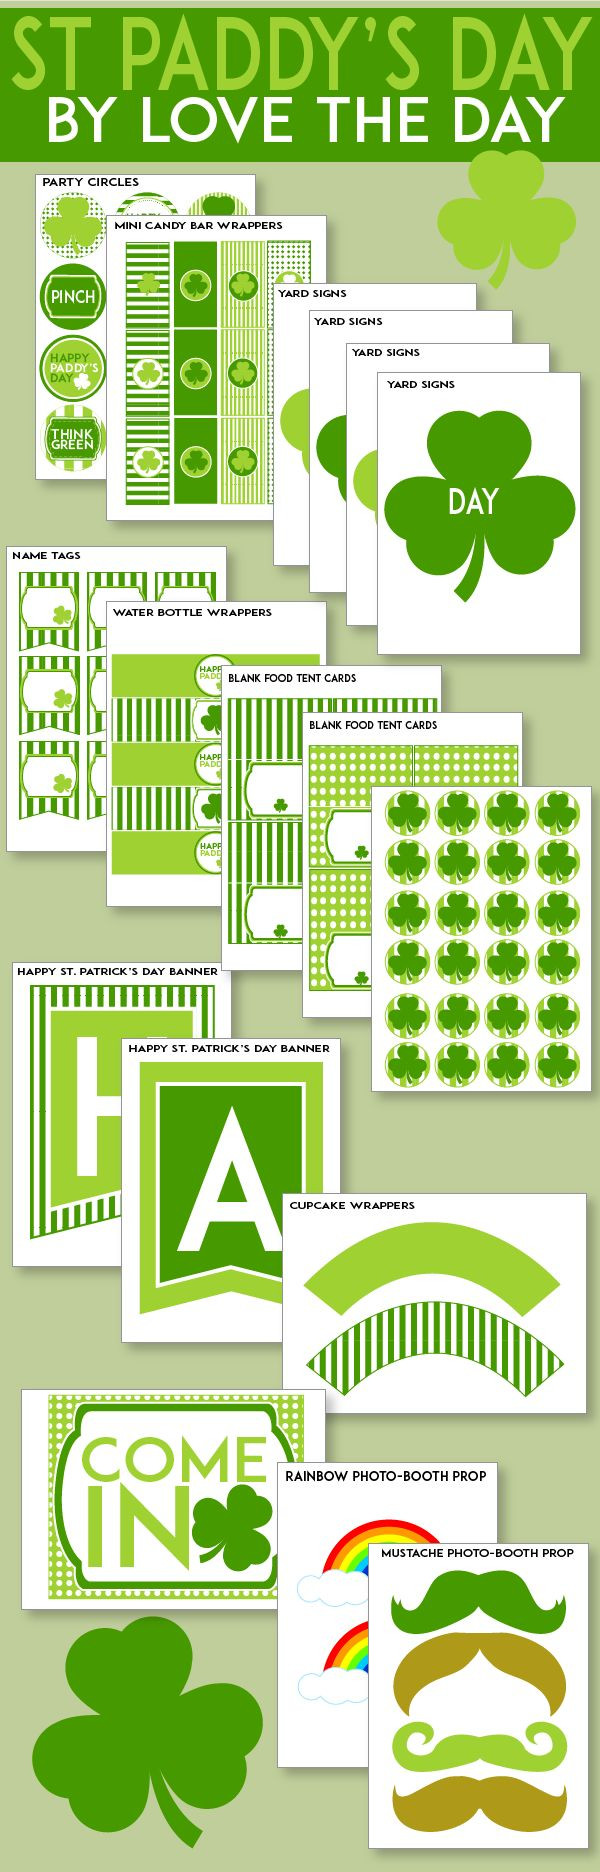 St Patrick Day Party Names
 FREE St Patrick’s Day Printable Party by Love The Day